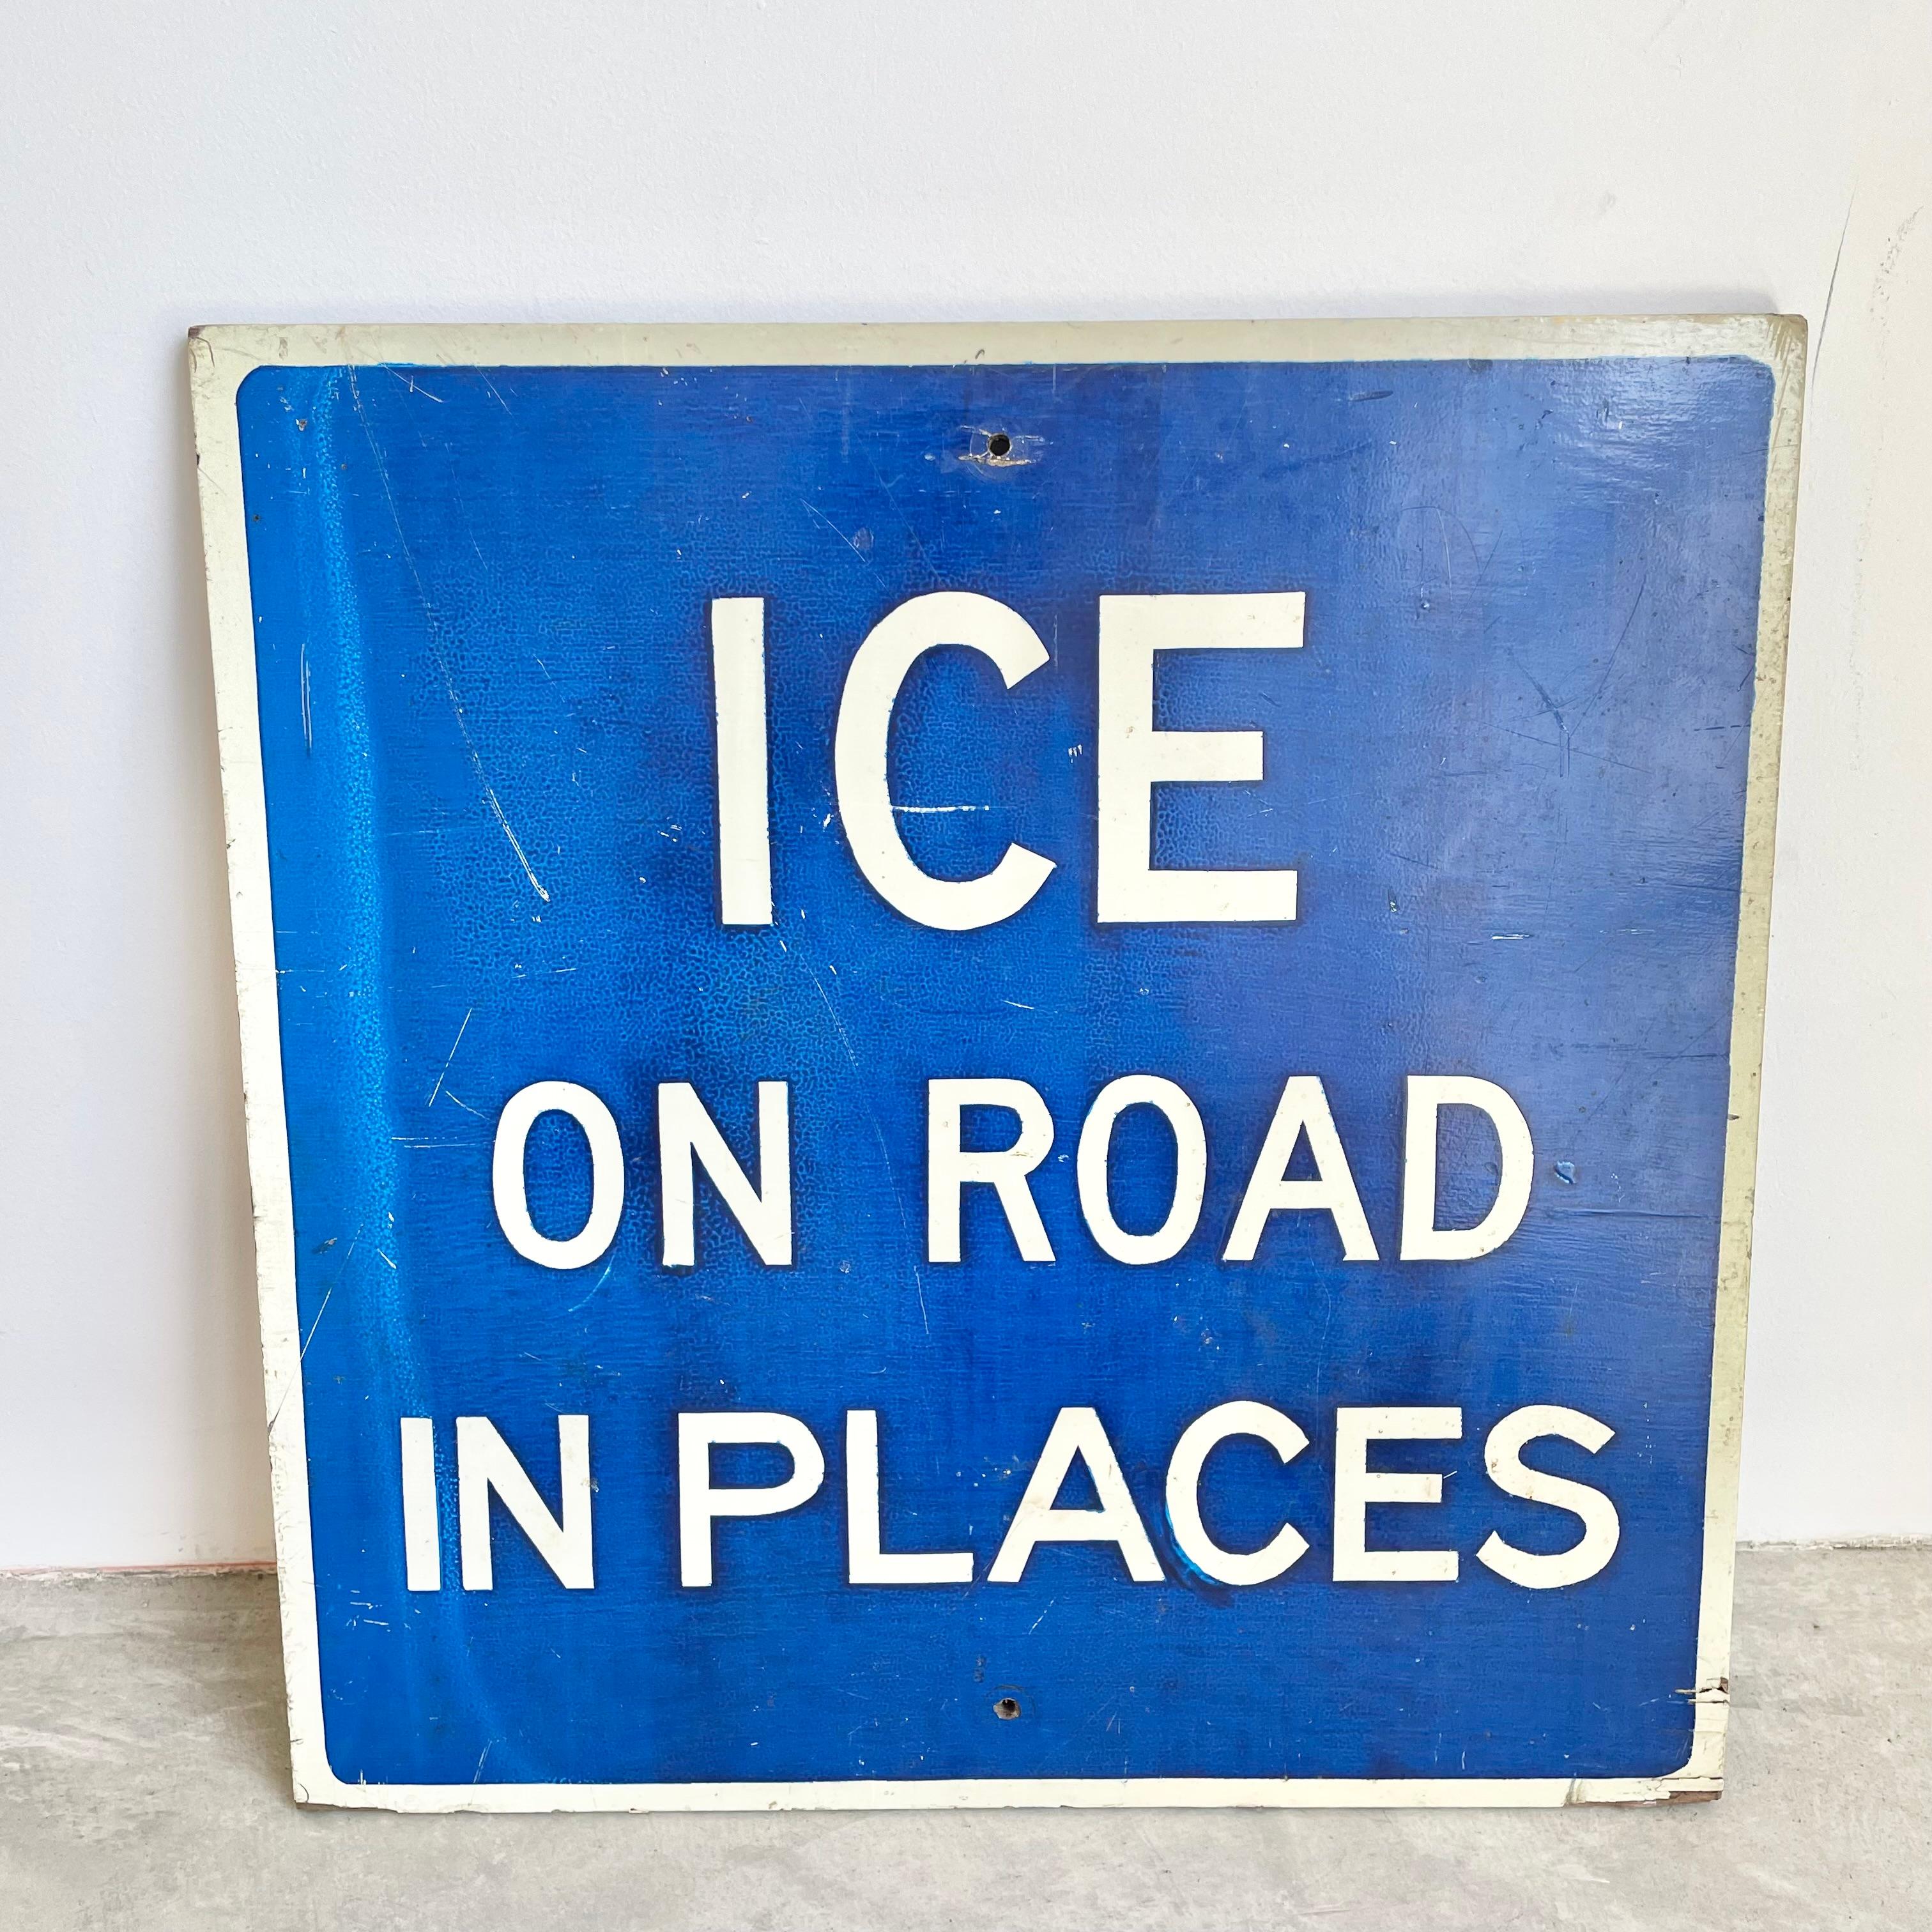 Great vintage wood sign from the 1980s. Hand-painted. Deep blue background with white lettering and white border. Very good vintage condition. Perfect for a cabin or winter house. Fun piece of transportation memorabilia, fantastic coloring and age.